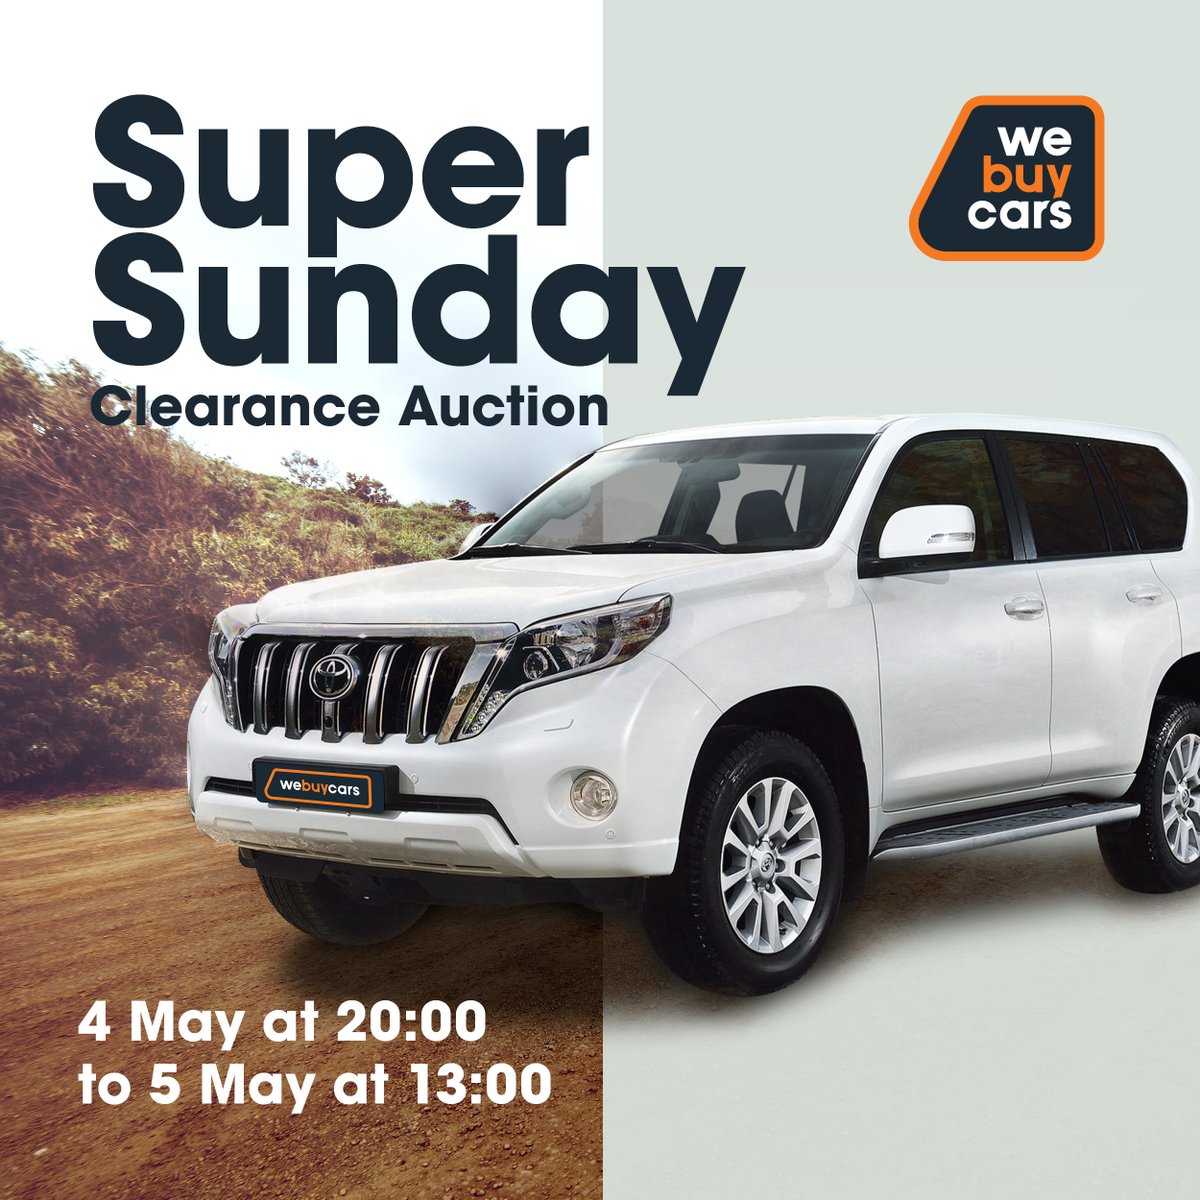 Don't miss these unbeatable deals 🙌 Bid in the #WeBuyCars Clearance Auction and stand a chance to get your dream vehicle at an affordable price! 🚗 #carsforsale #preownedcars #usedcars #usedcarsforsale #carshopping #carfinance #autosales #carsales #carlifestyle #toyotanation